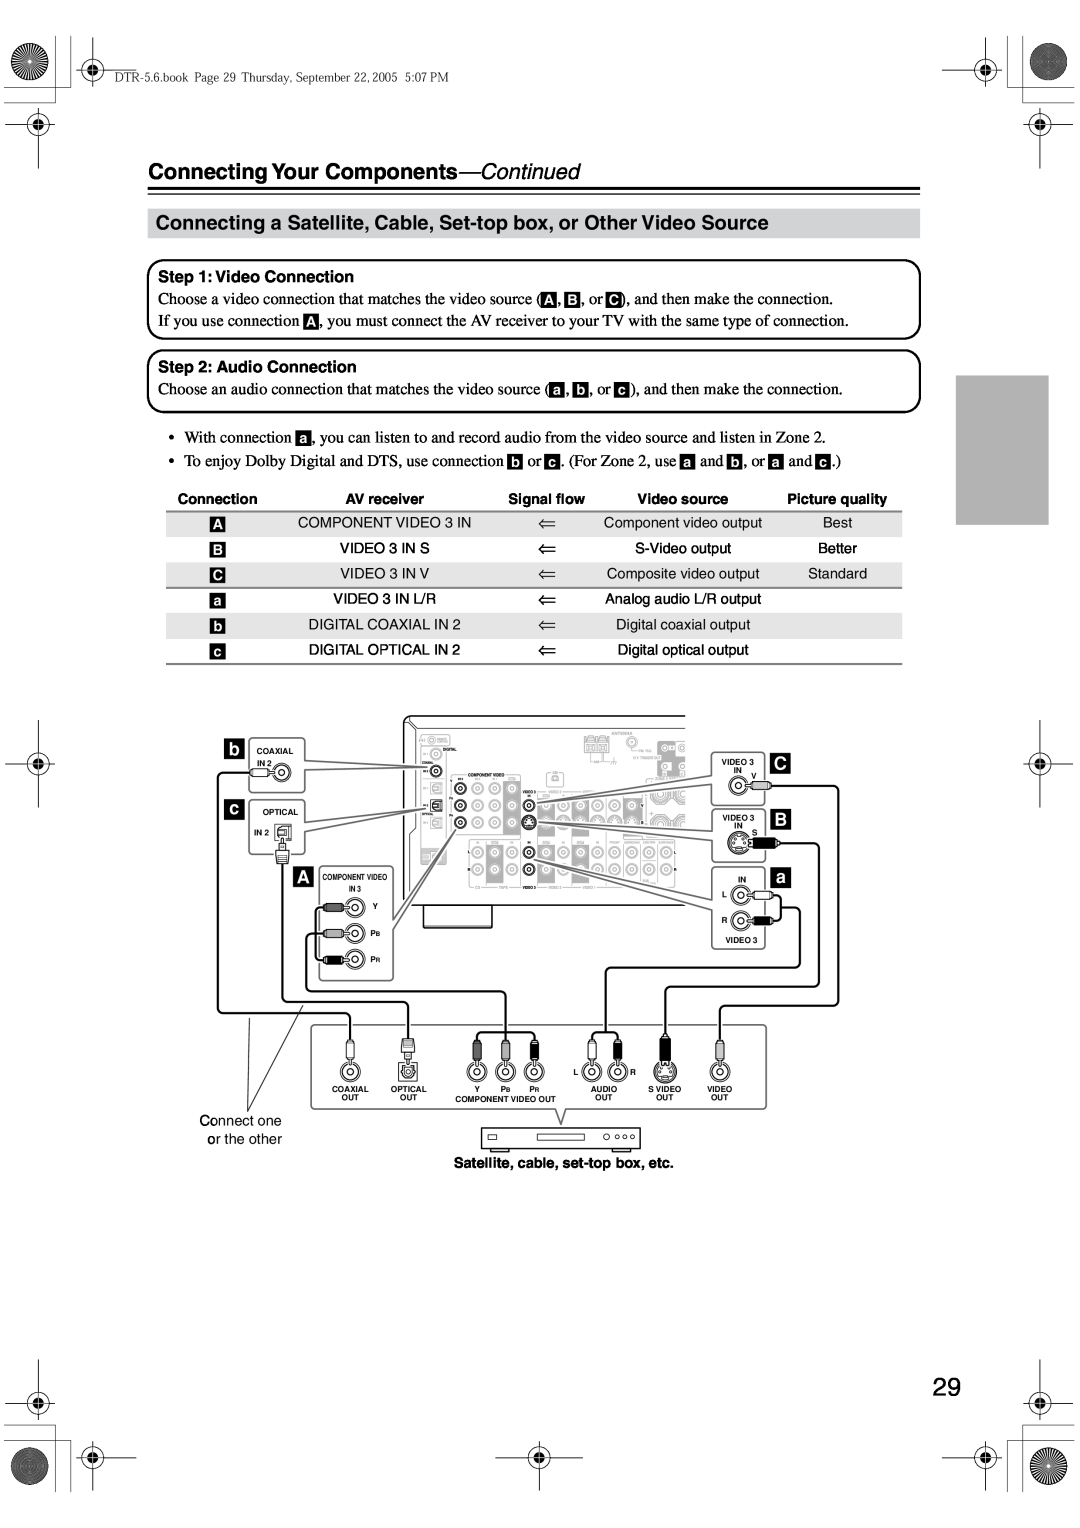 Integra DTR-5.6 instruction manual Connecting Your Components—Continued, C B a, Satellite, cable, set-topbox, etc 